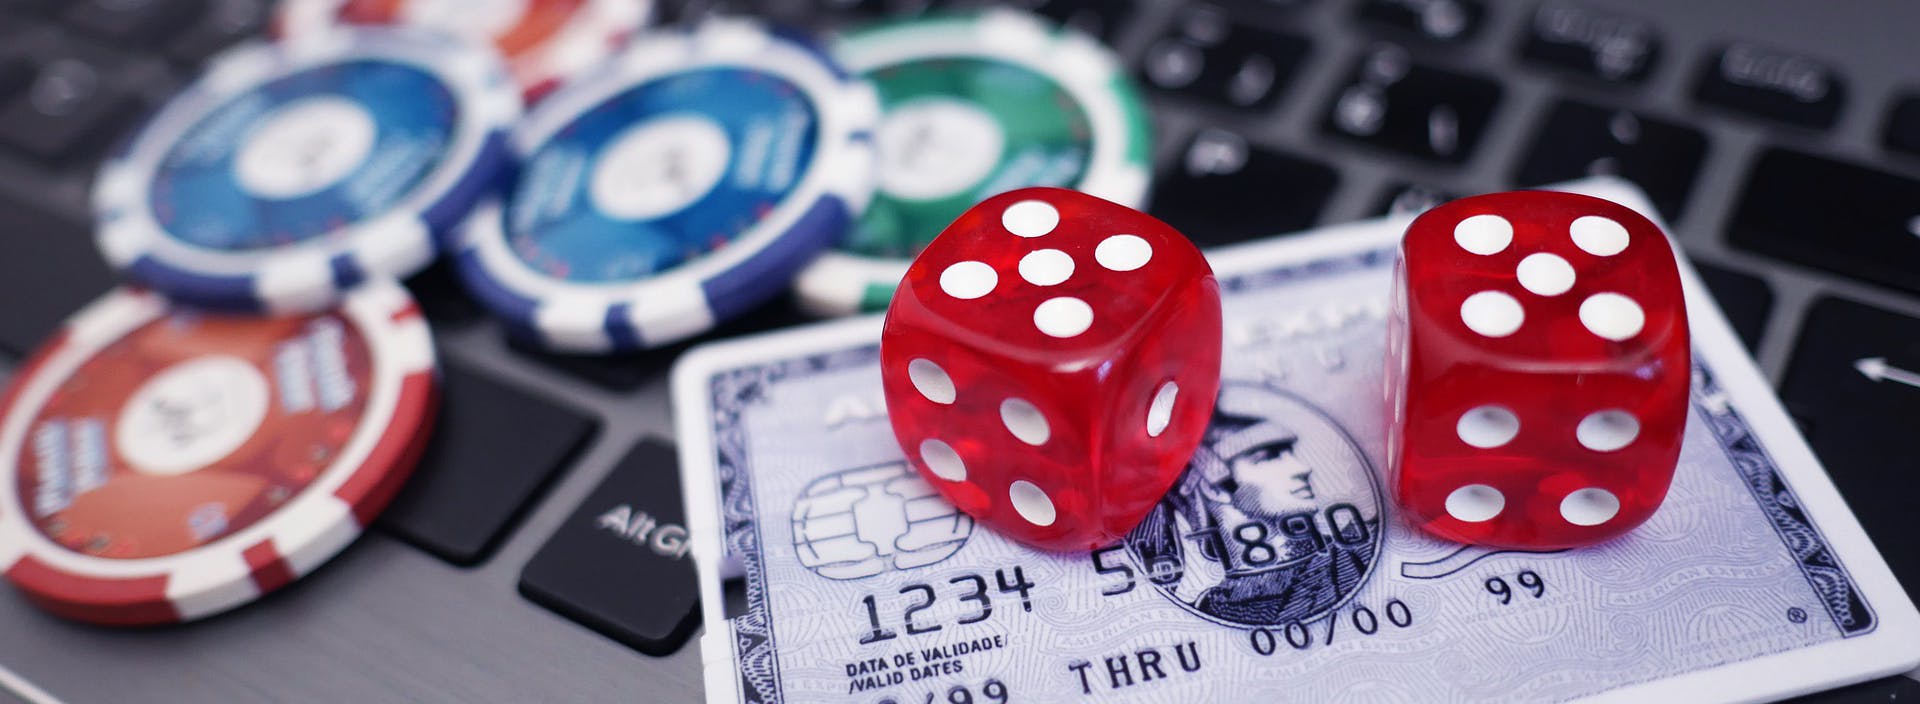 5 Online Casino Tips That Work Like A Charm